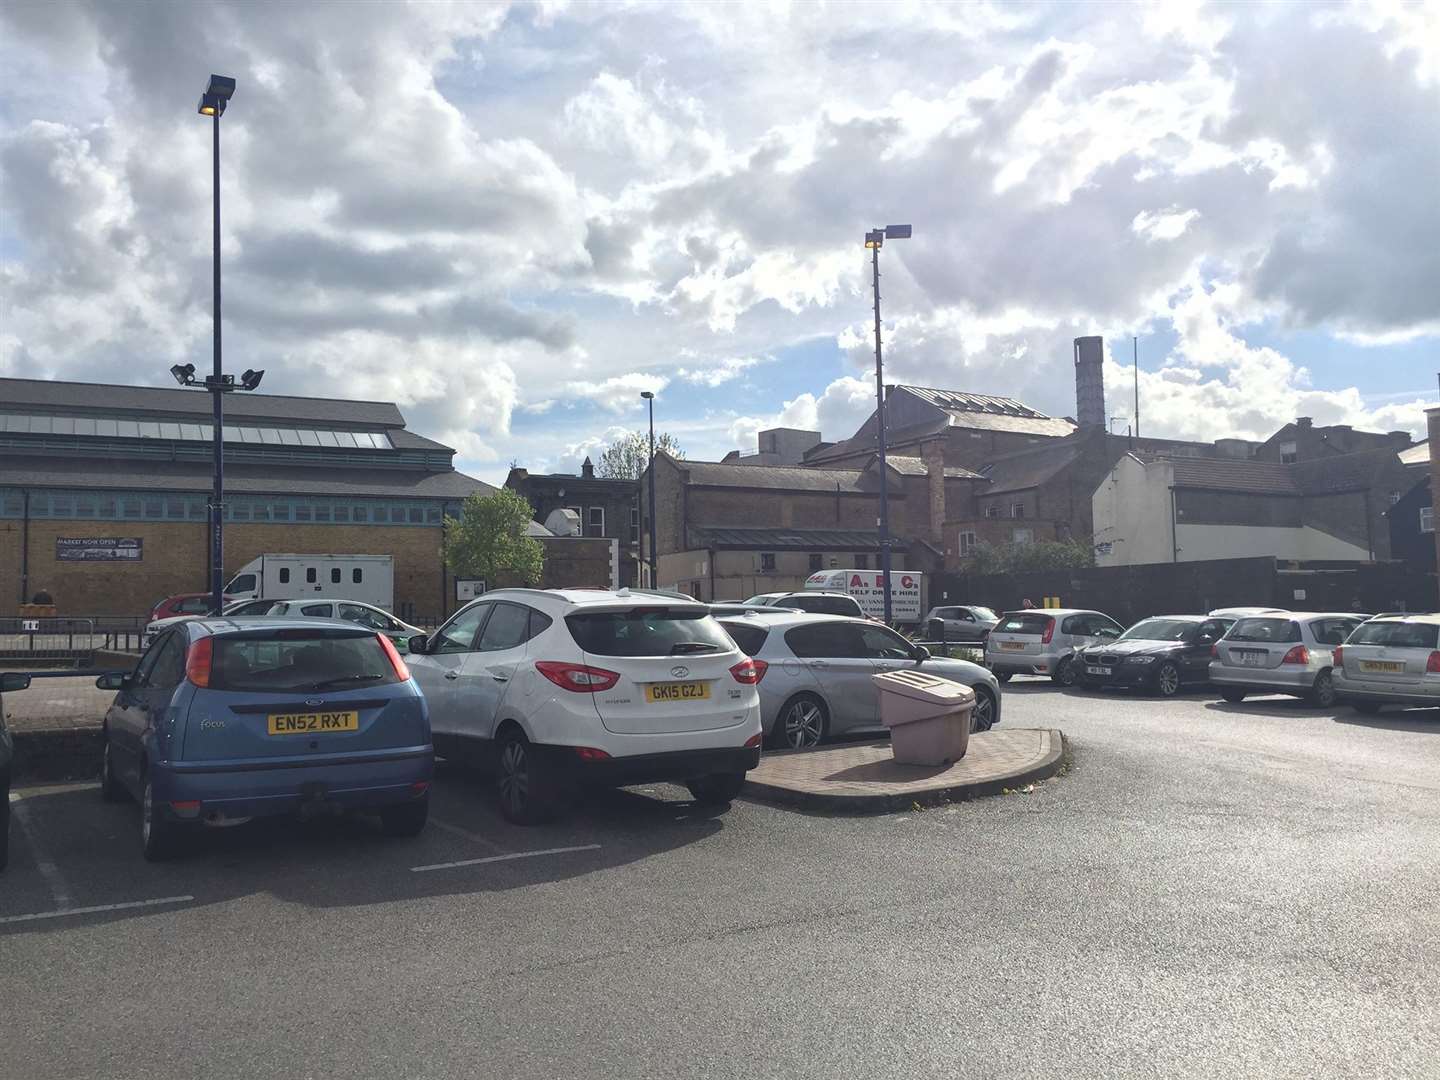 Market Square car park in Gravesend has 123 spaces